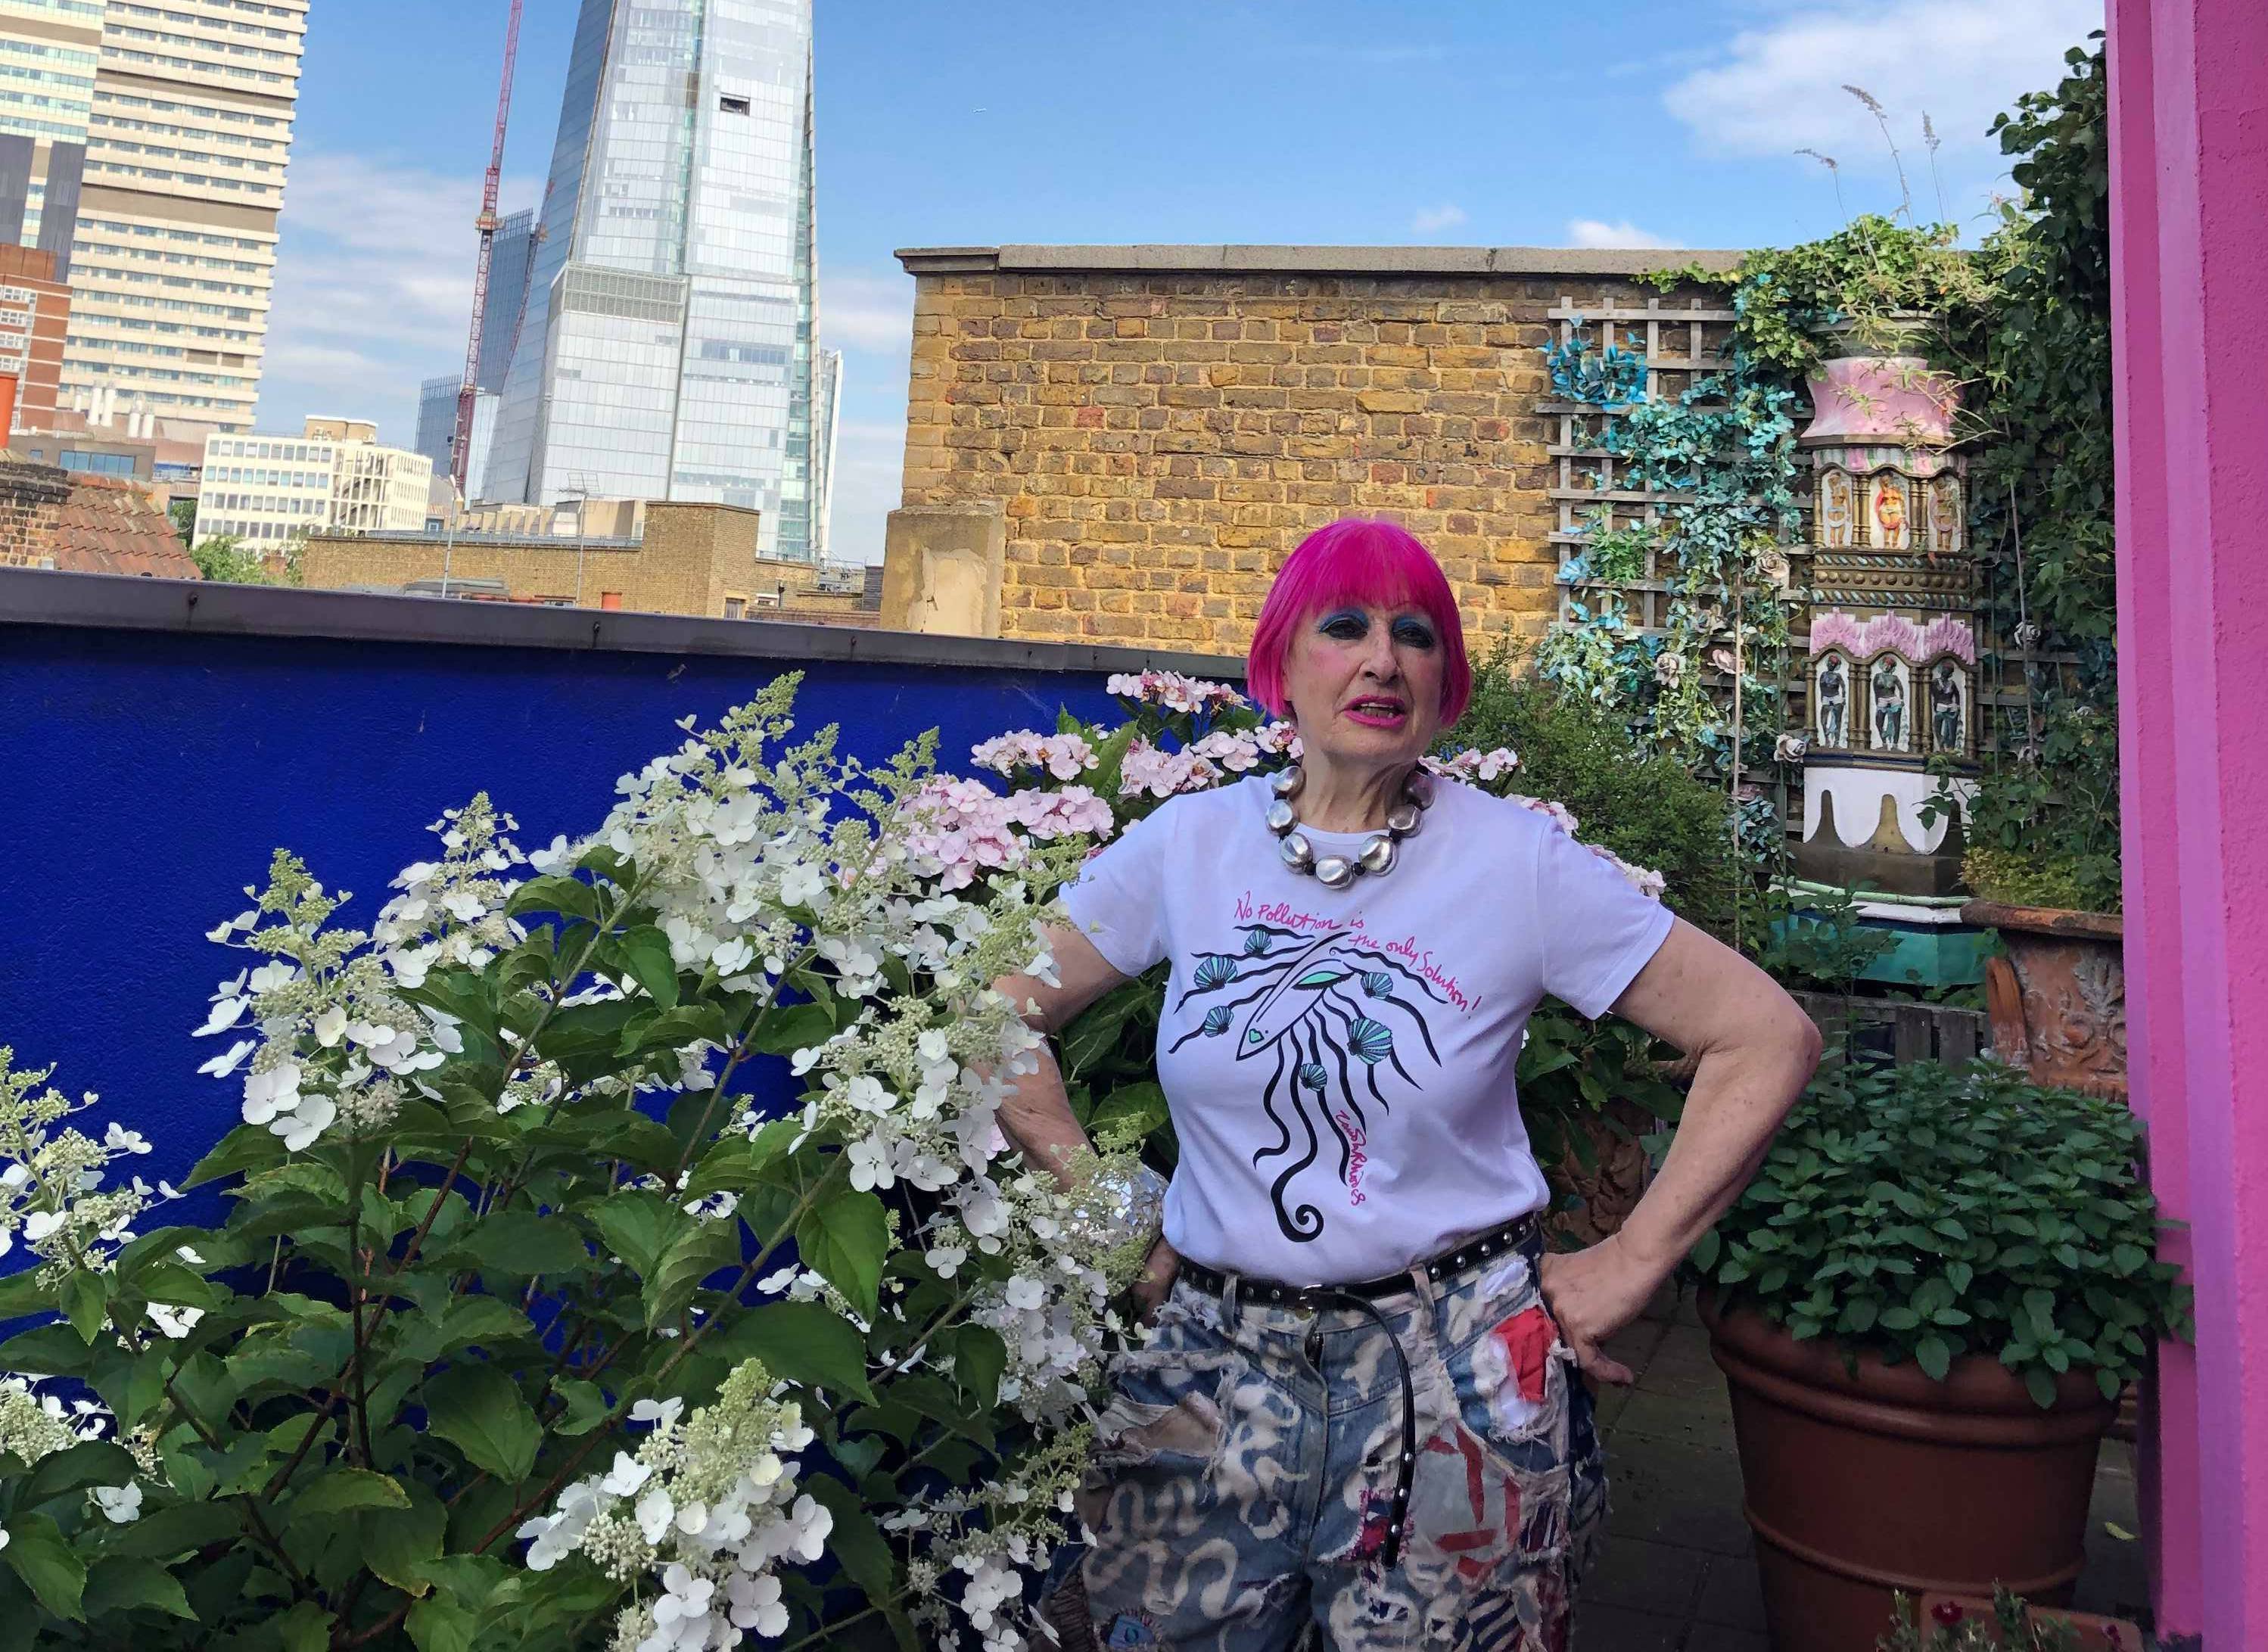 Zandra Rhodes charity t-shirt will help to ‘Save the Sea’ from plastic pollution